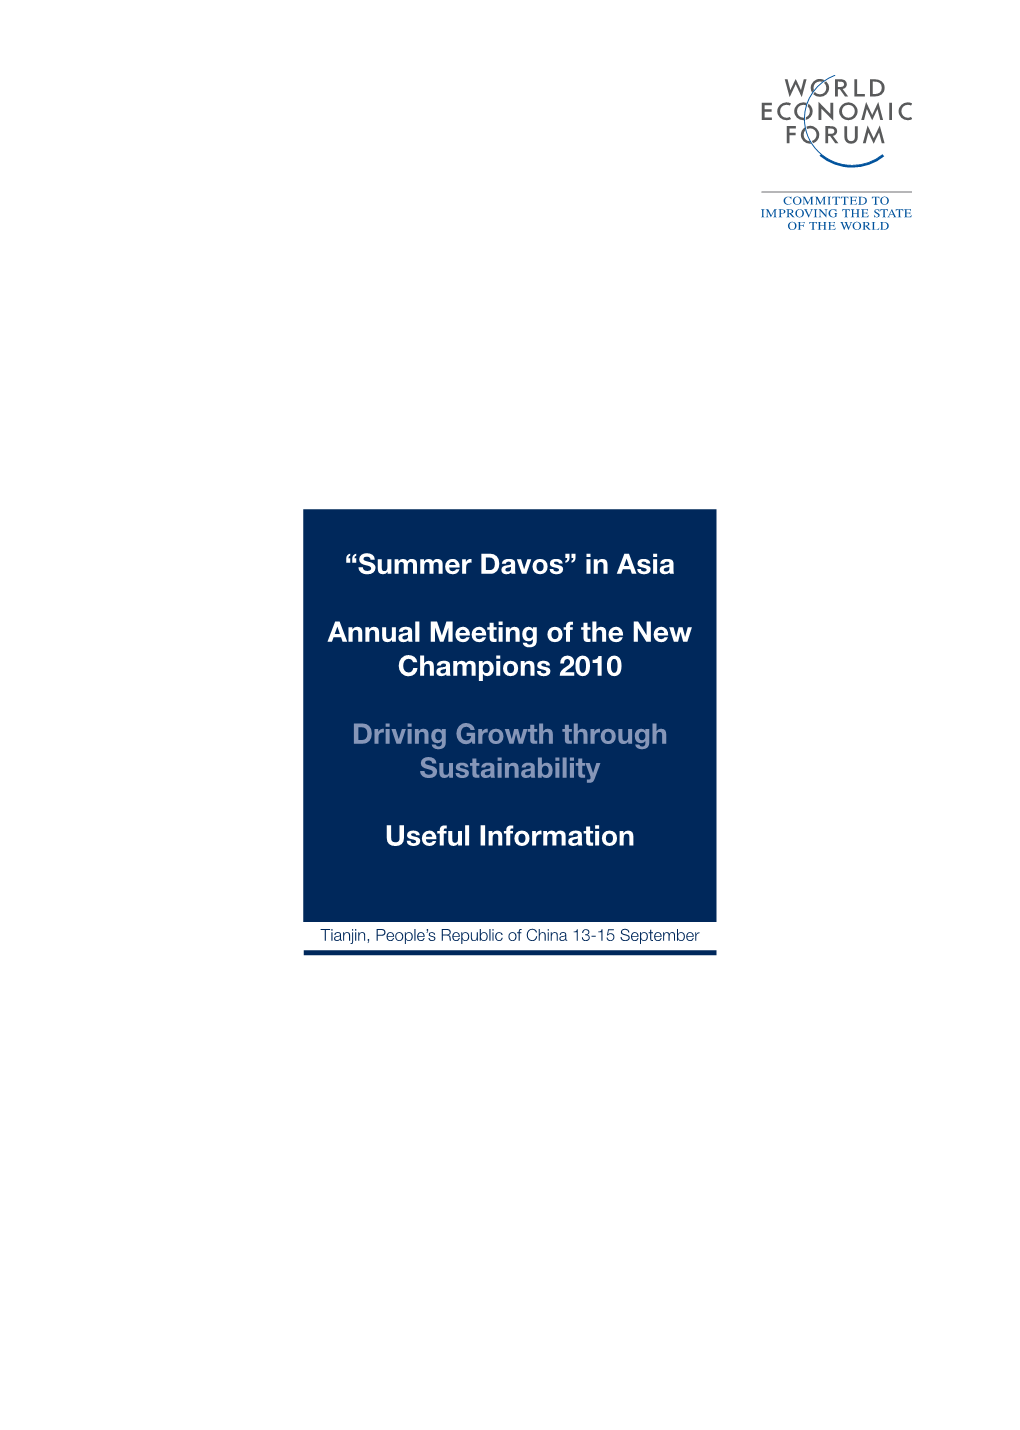 “Summer Davos” in Asia Annual Meeting of the New Champions